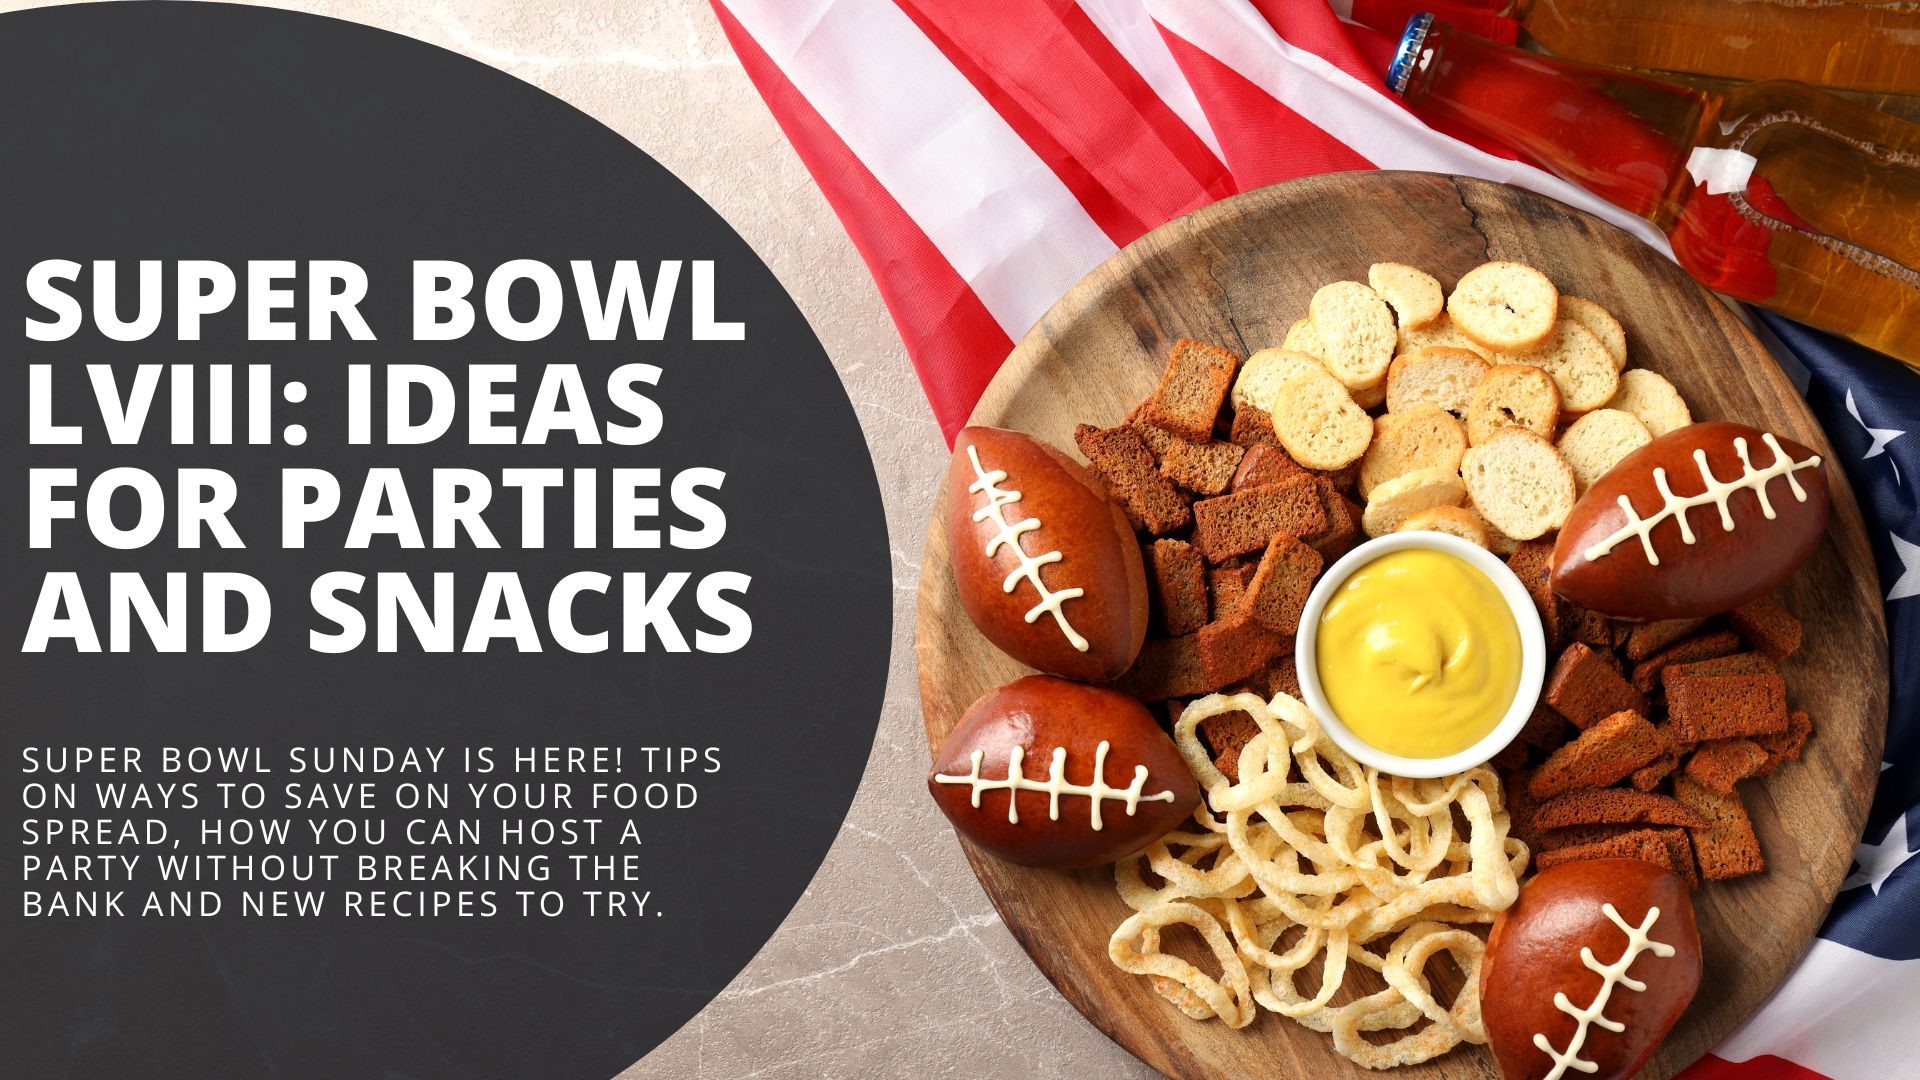 Super Bowl Sunday is here! Tips on ways to save on your food spread, how you can host a party without breaking the bank and new recipes to try.